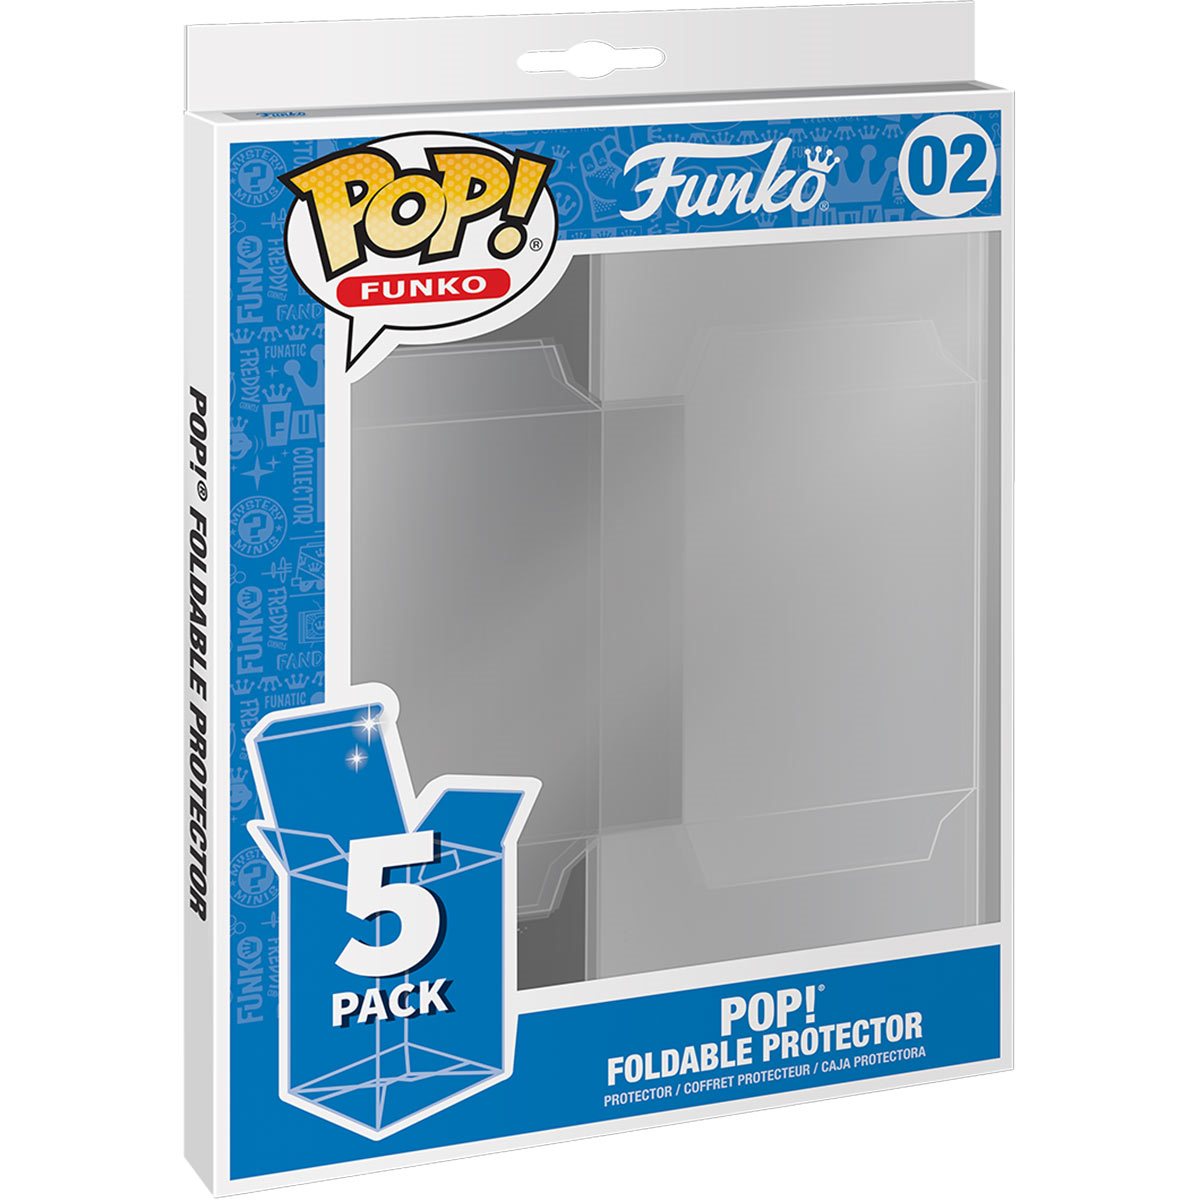 Every 10 inch Funko pop checklist!! Ive got them all so far except the last  5 shown waiting to release!!!